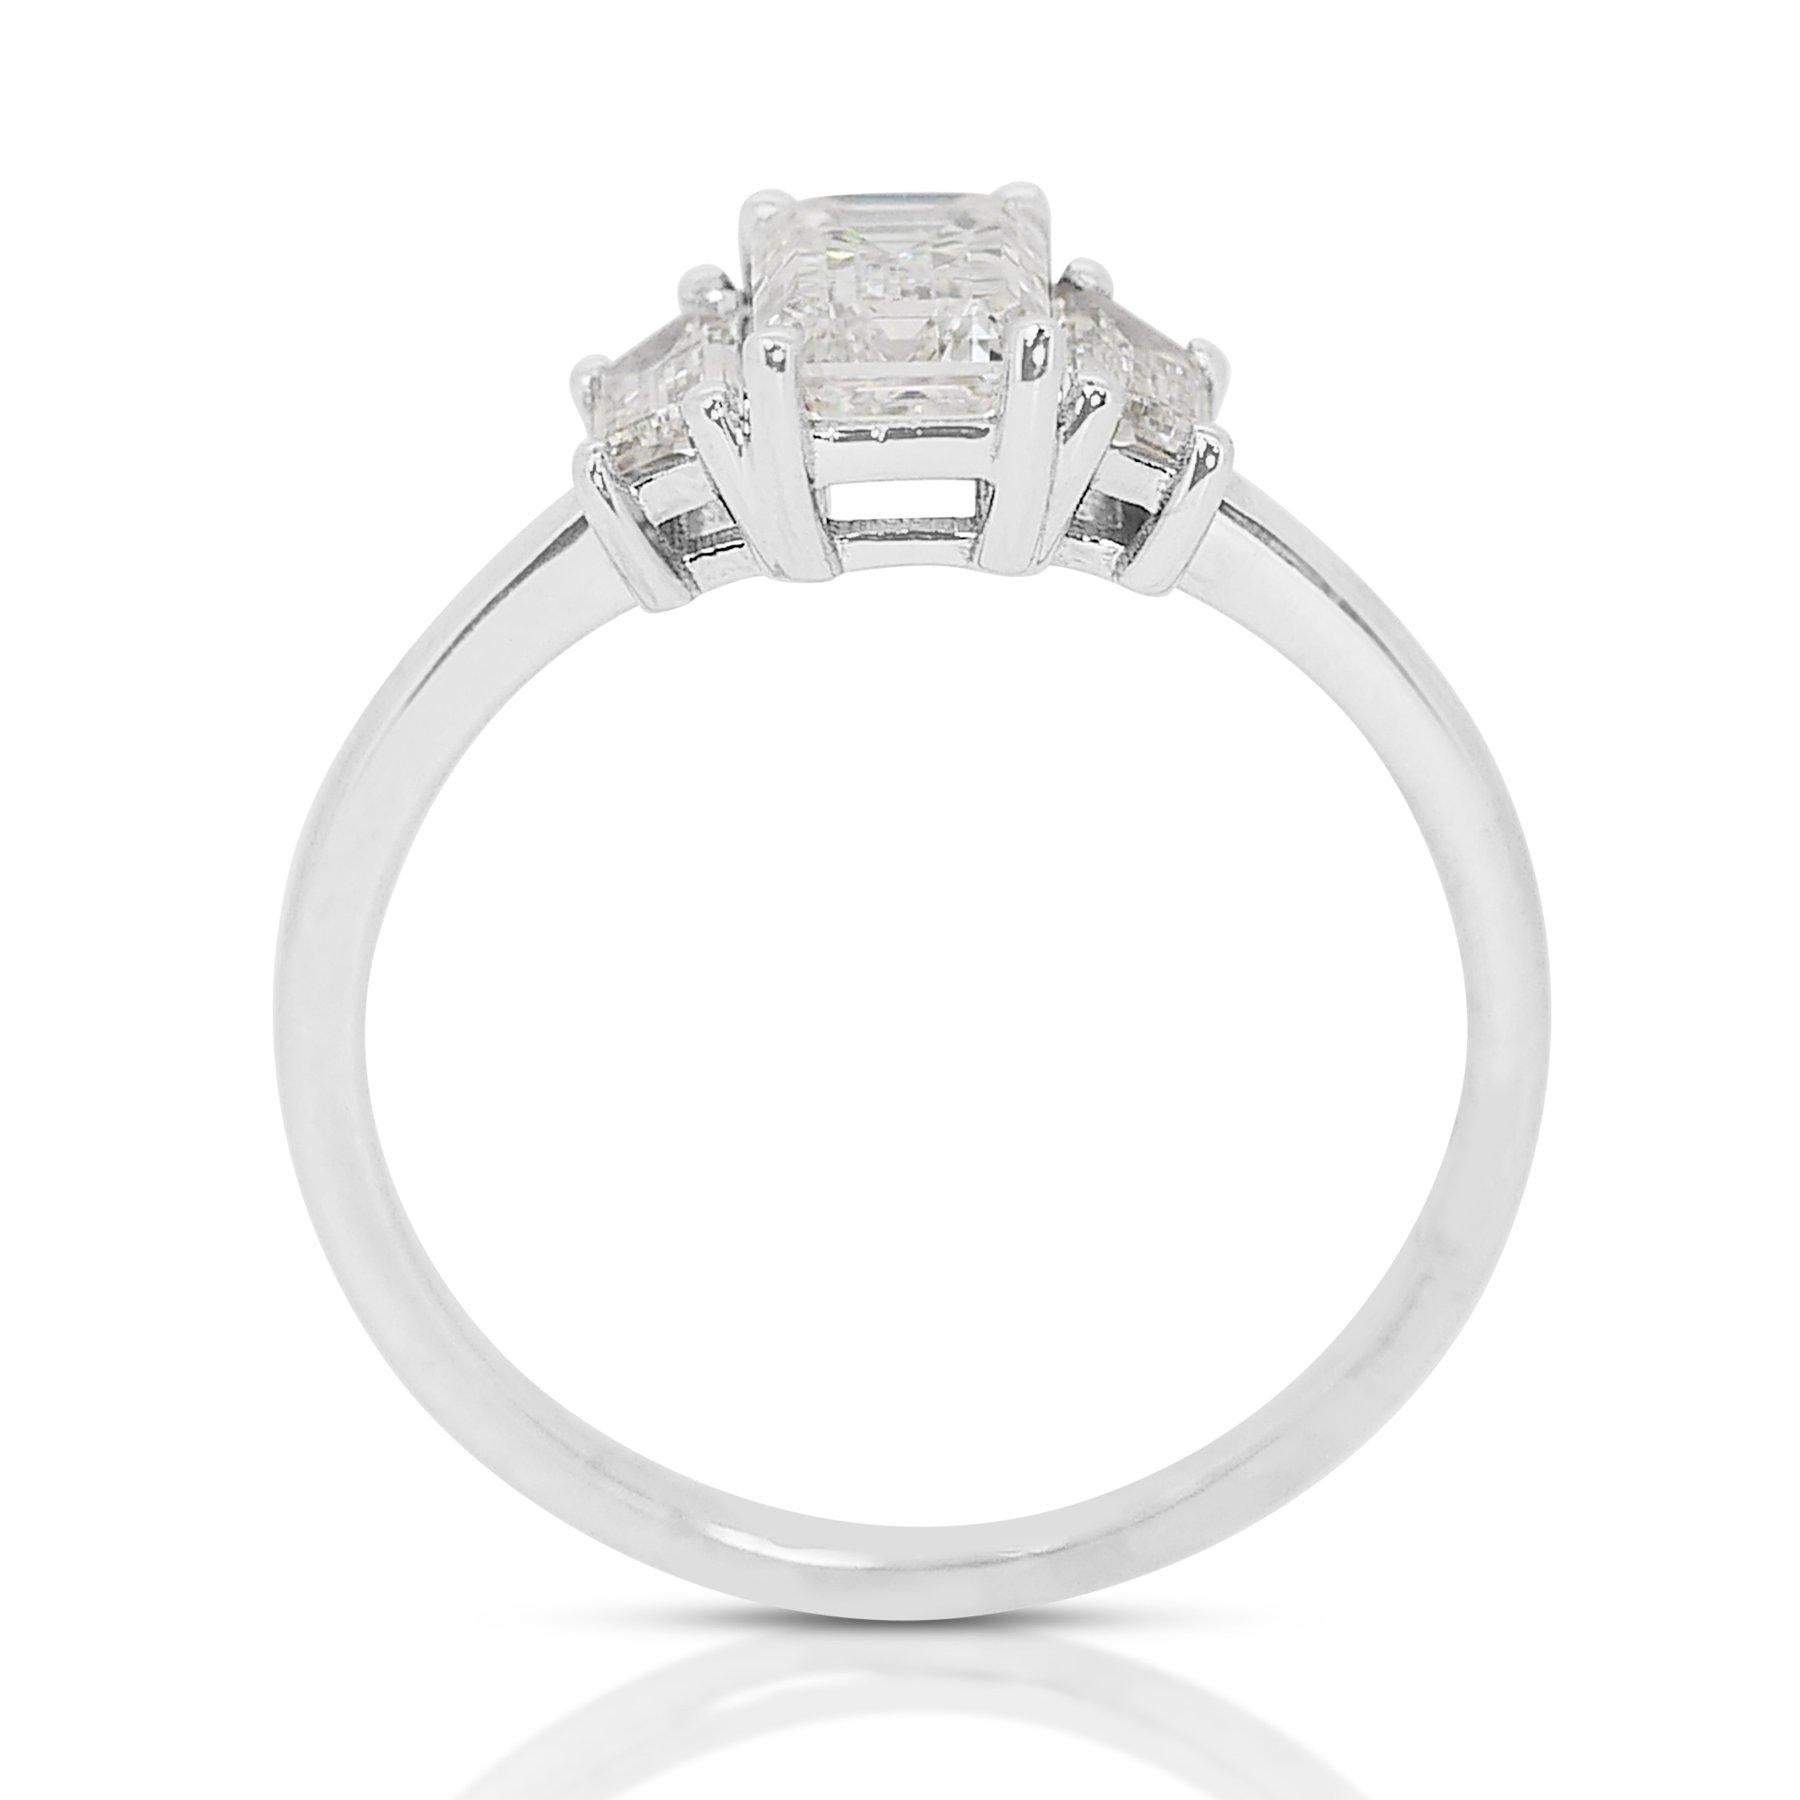 Magnificent 1.35ct Diamond 3-Stone Ring in 18k White Gold - GIA Certified For Sale 2